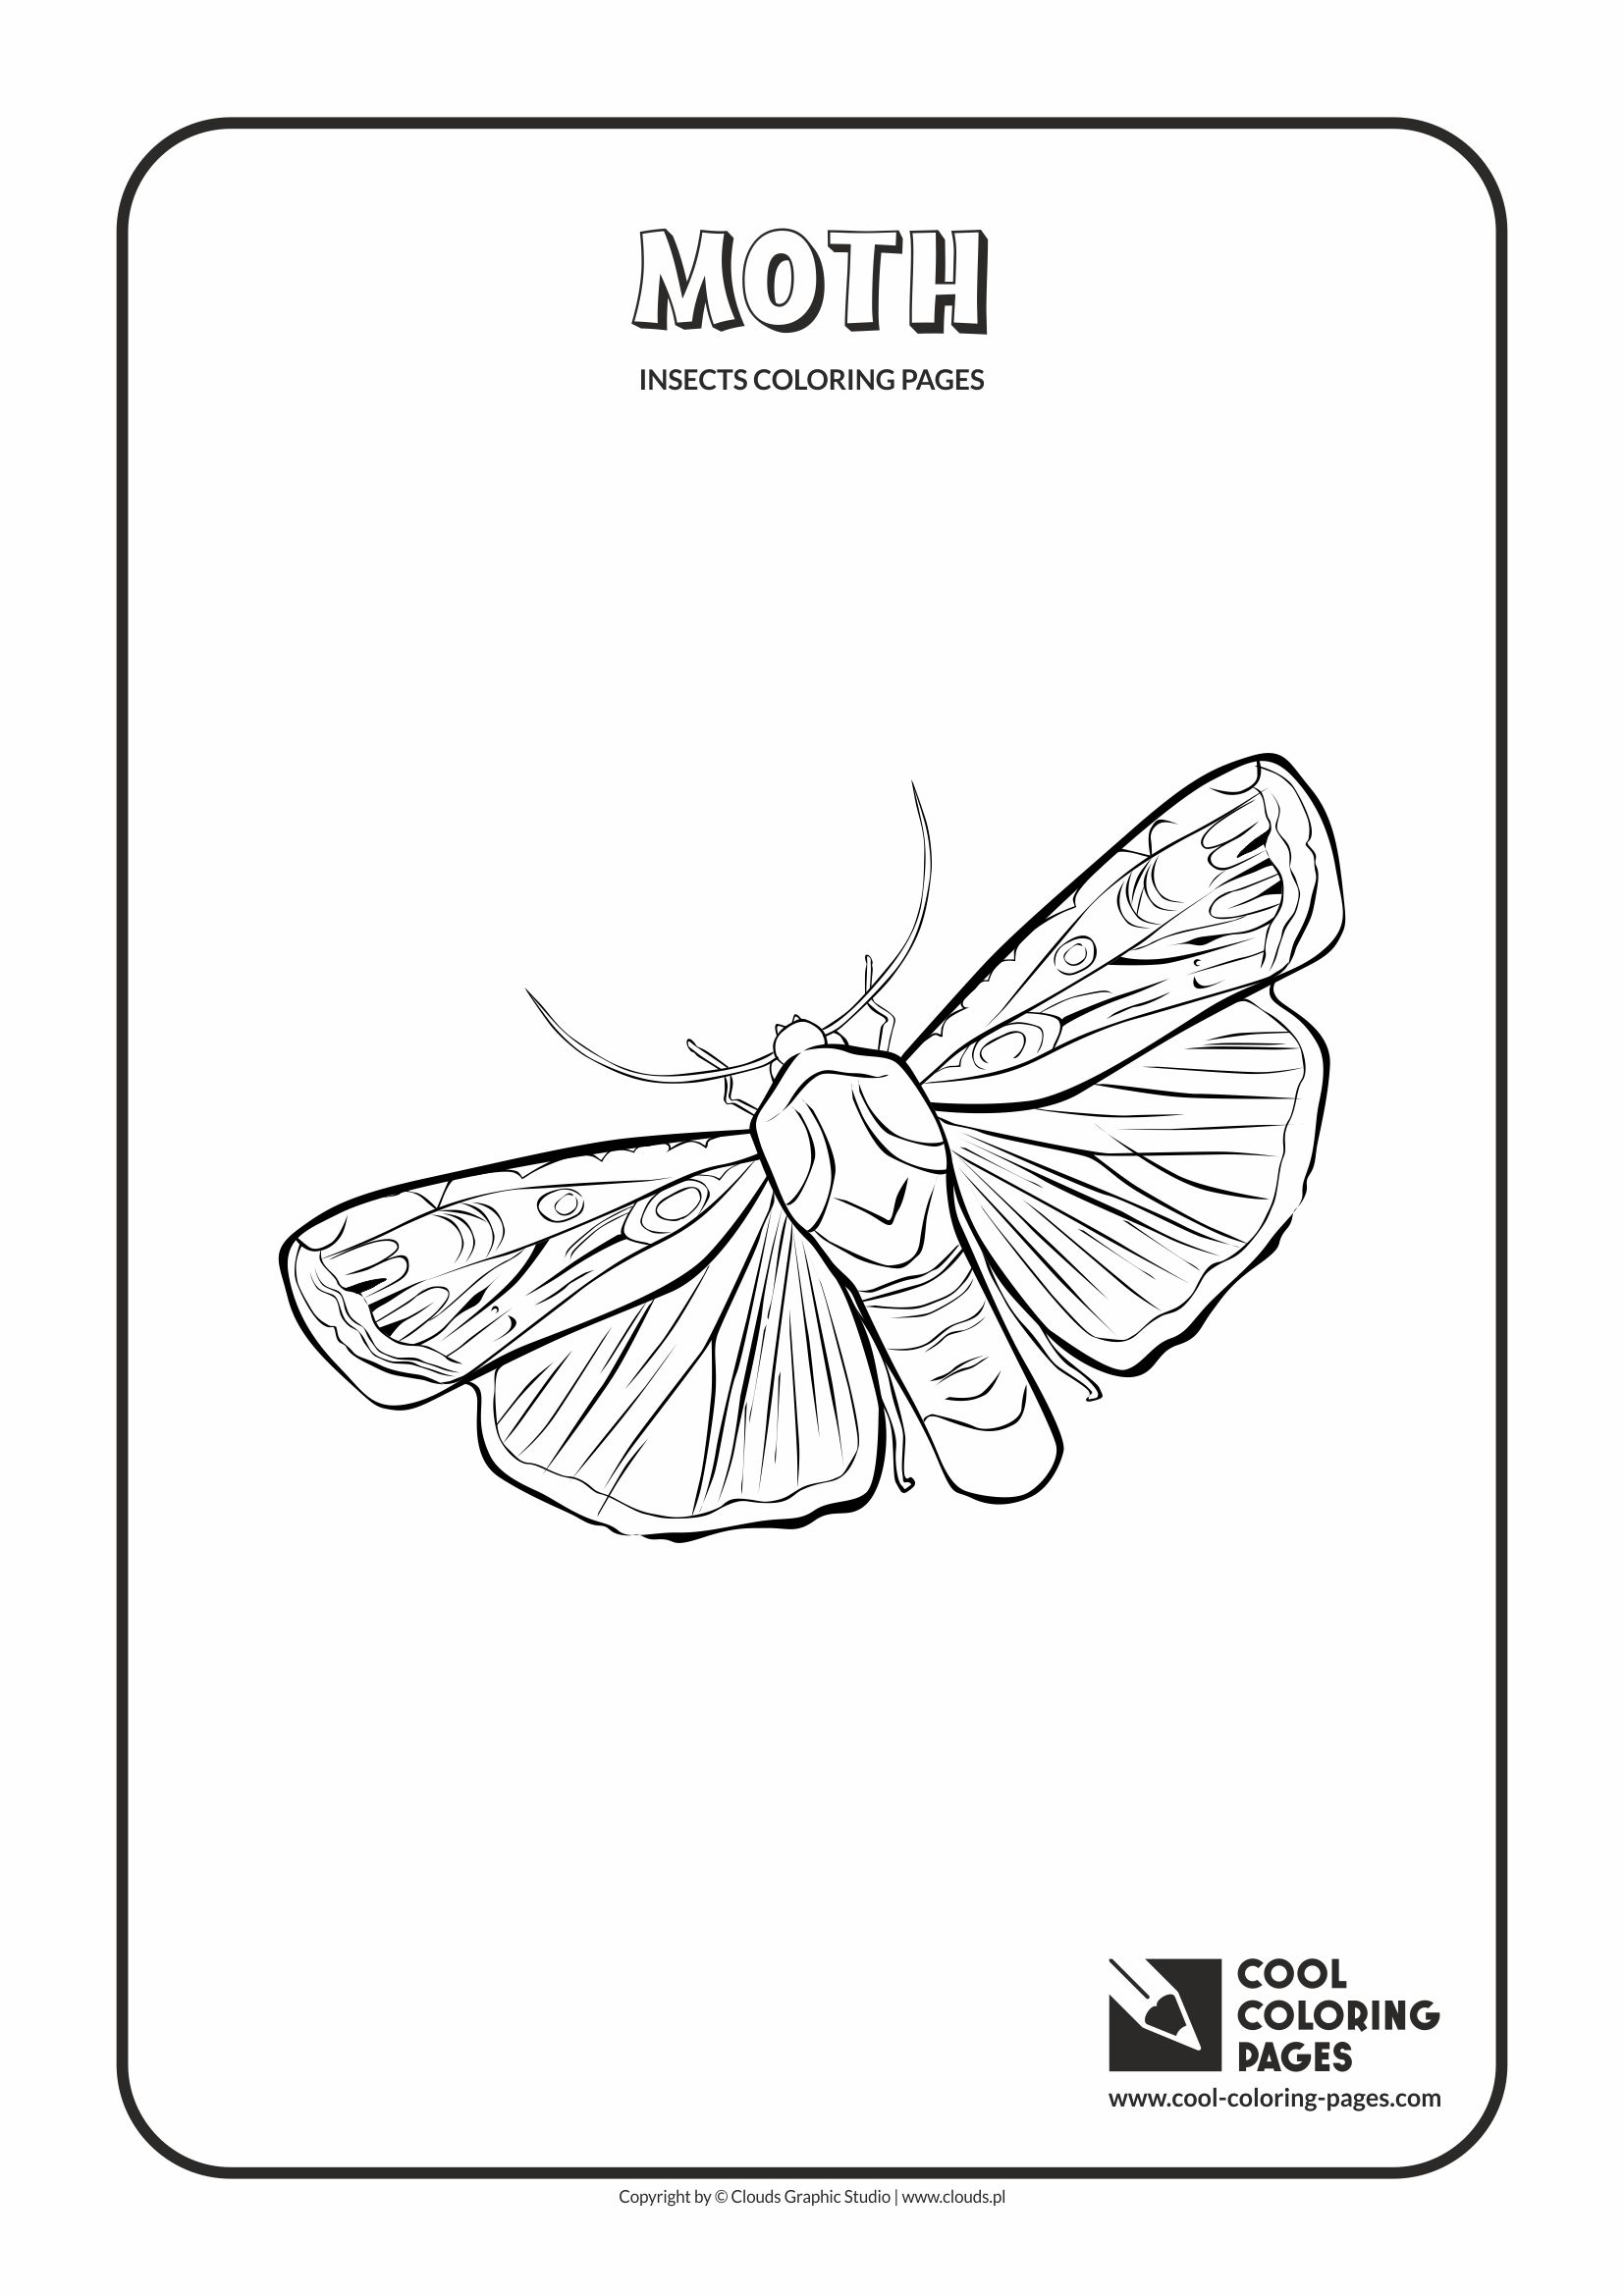 Cool Coloring Pages Moth coloring page - Cool Coloring Pages | Free  educational coloring pages and activities for kids